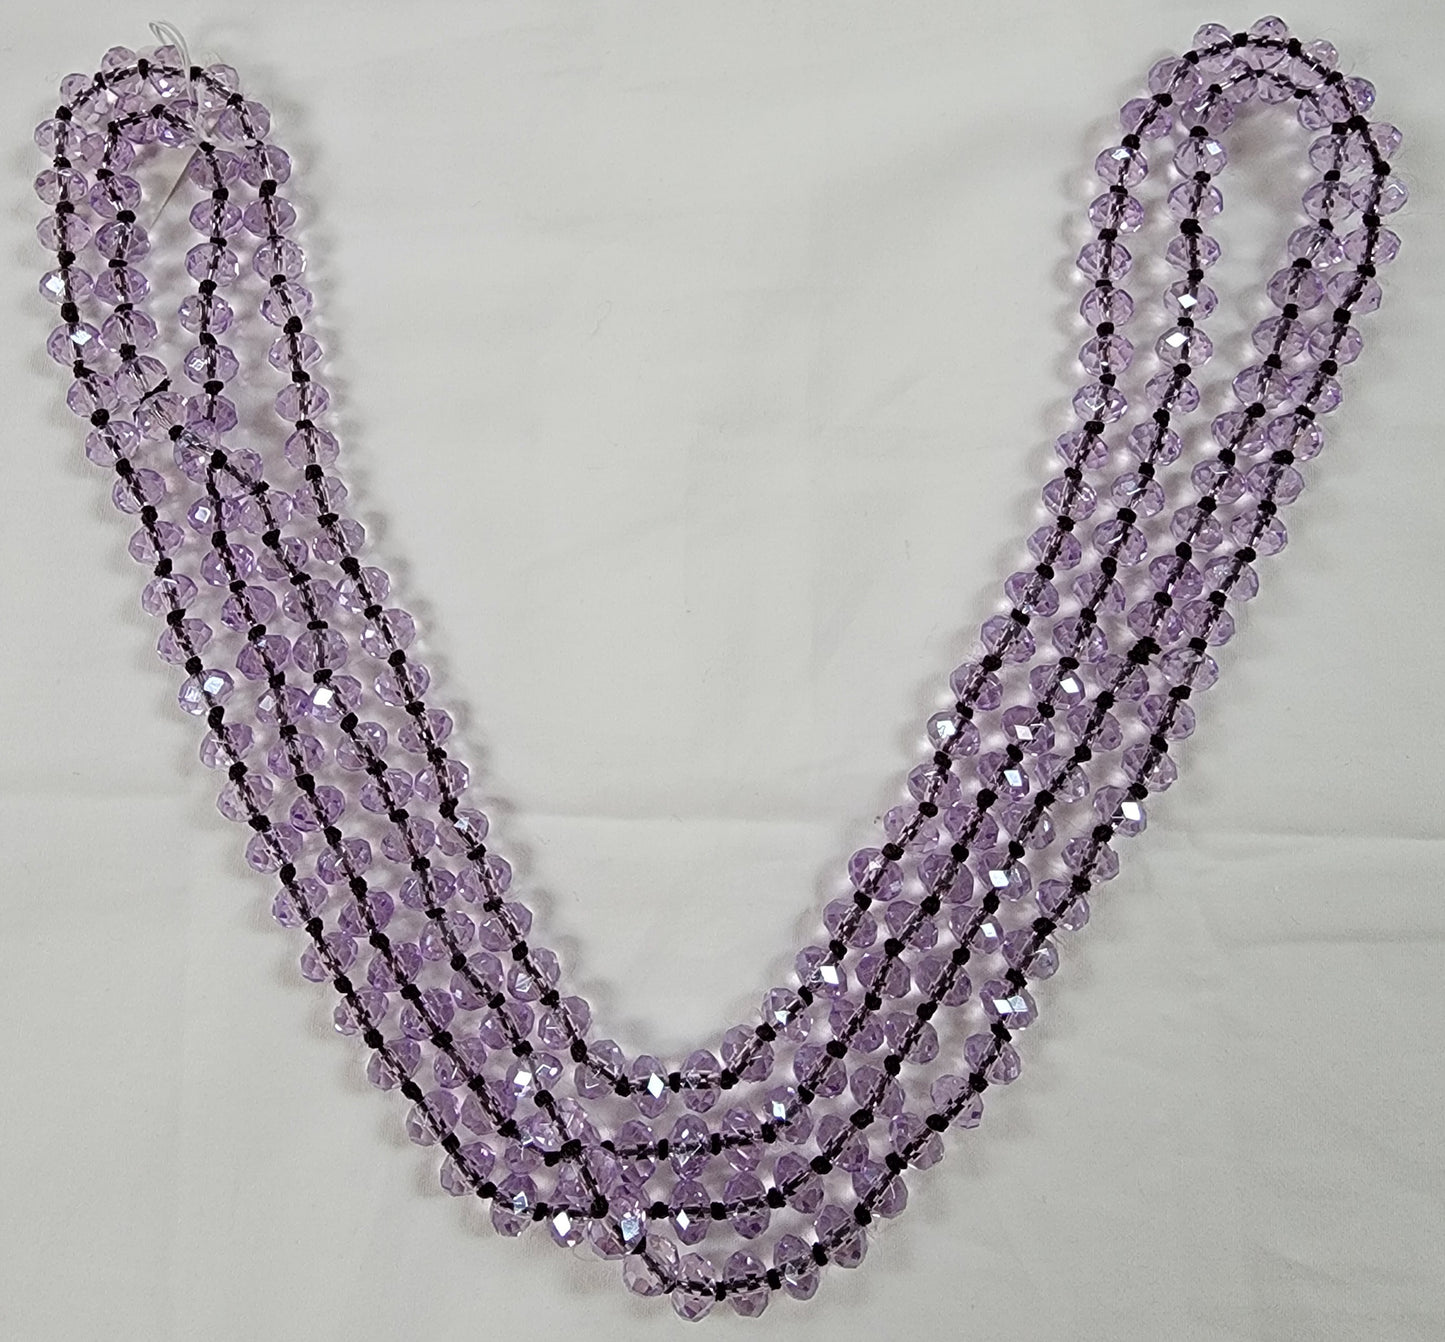 Bead Necklace Assorted Colors